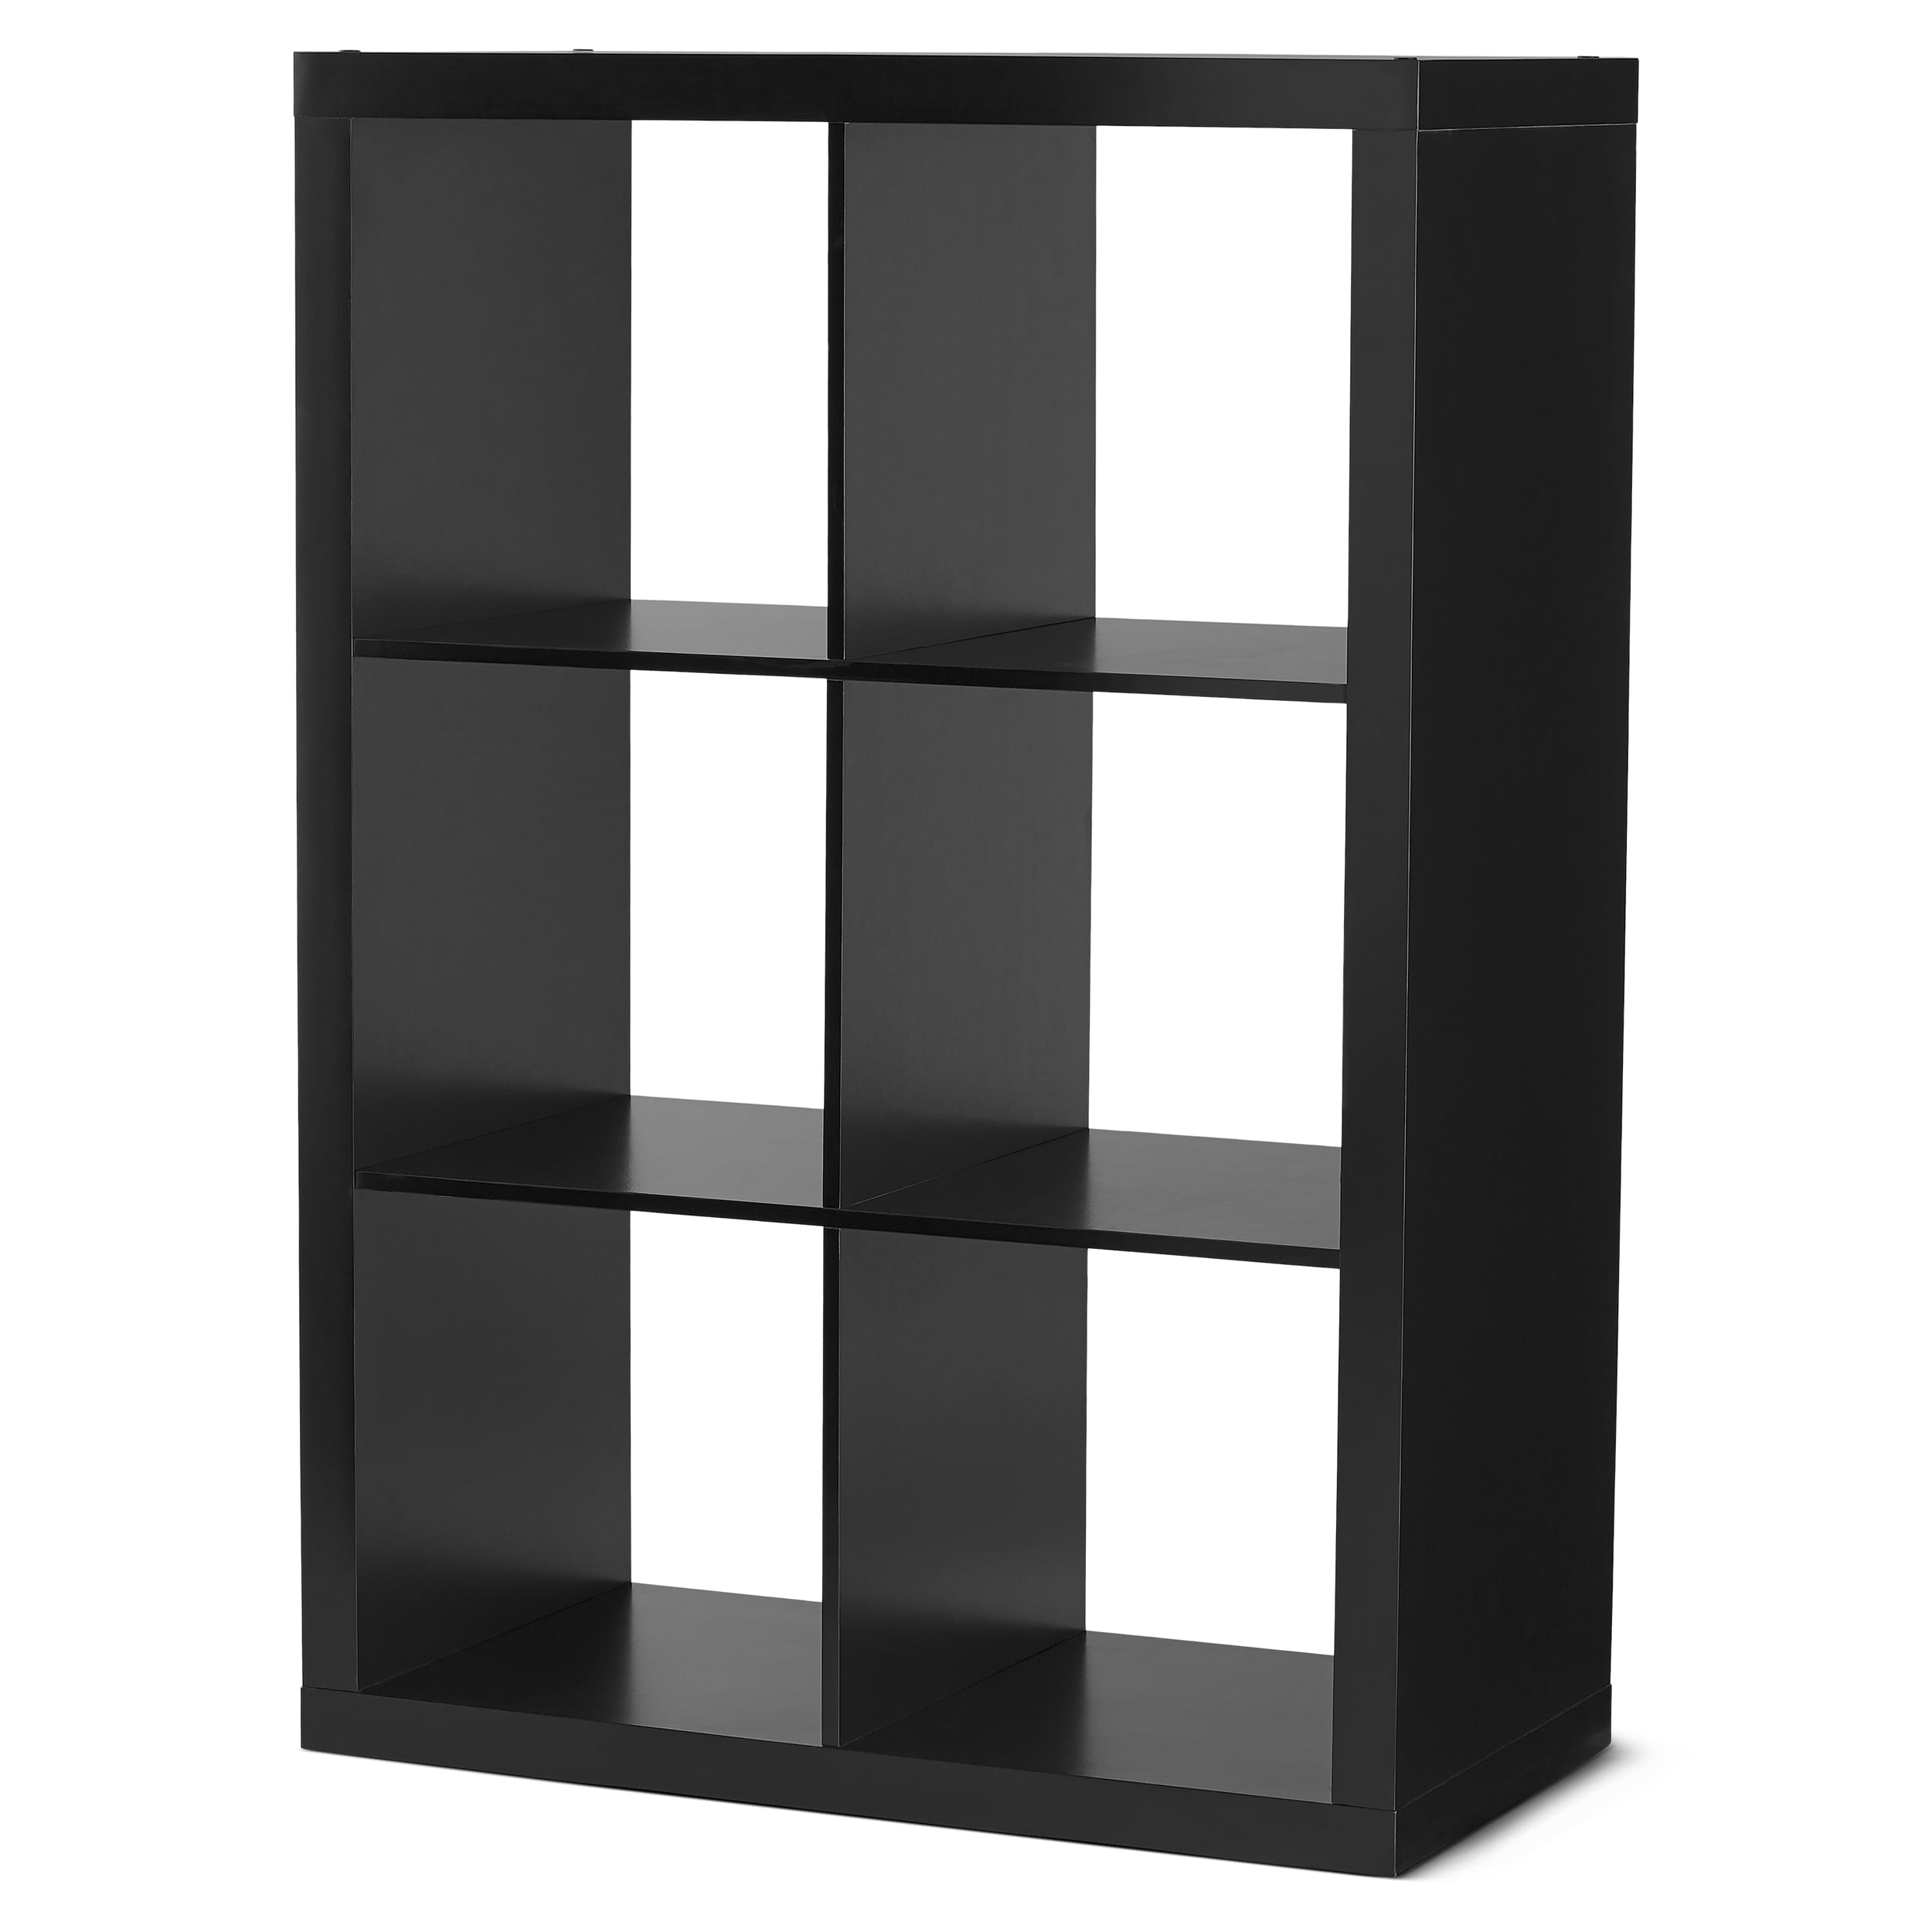 Multiple Colors Details about   Basic 6 Cube Storage Organizer Bookcase Storage with Bins 